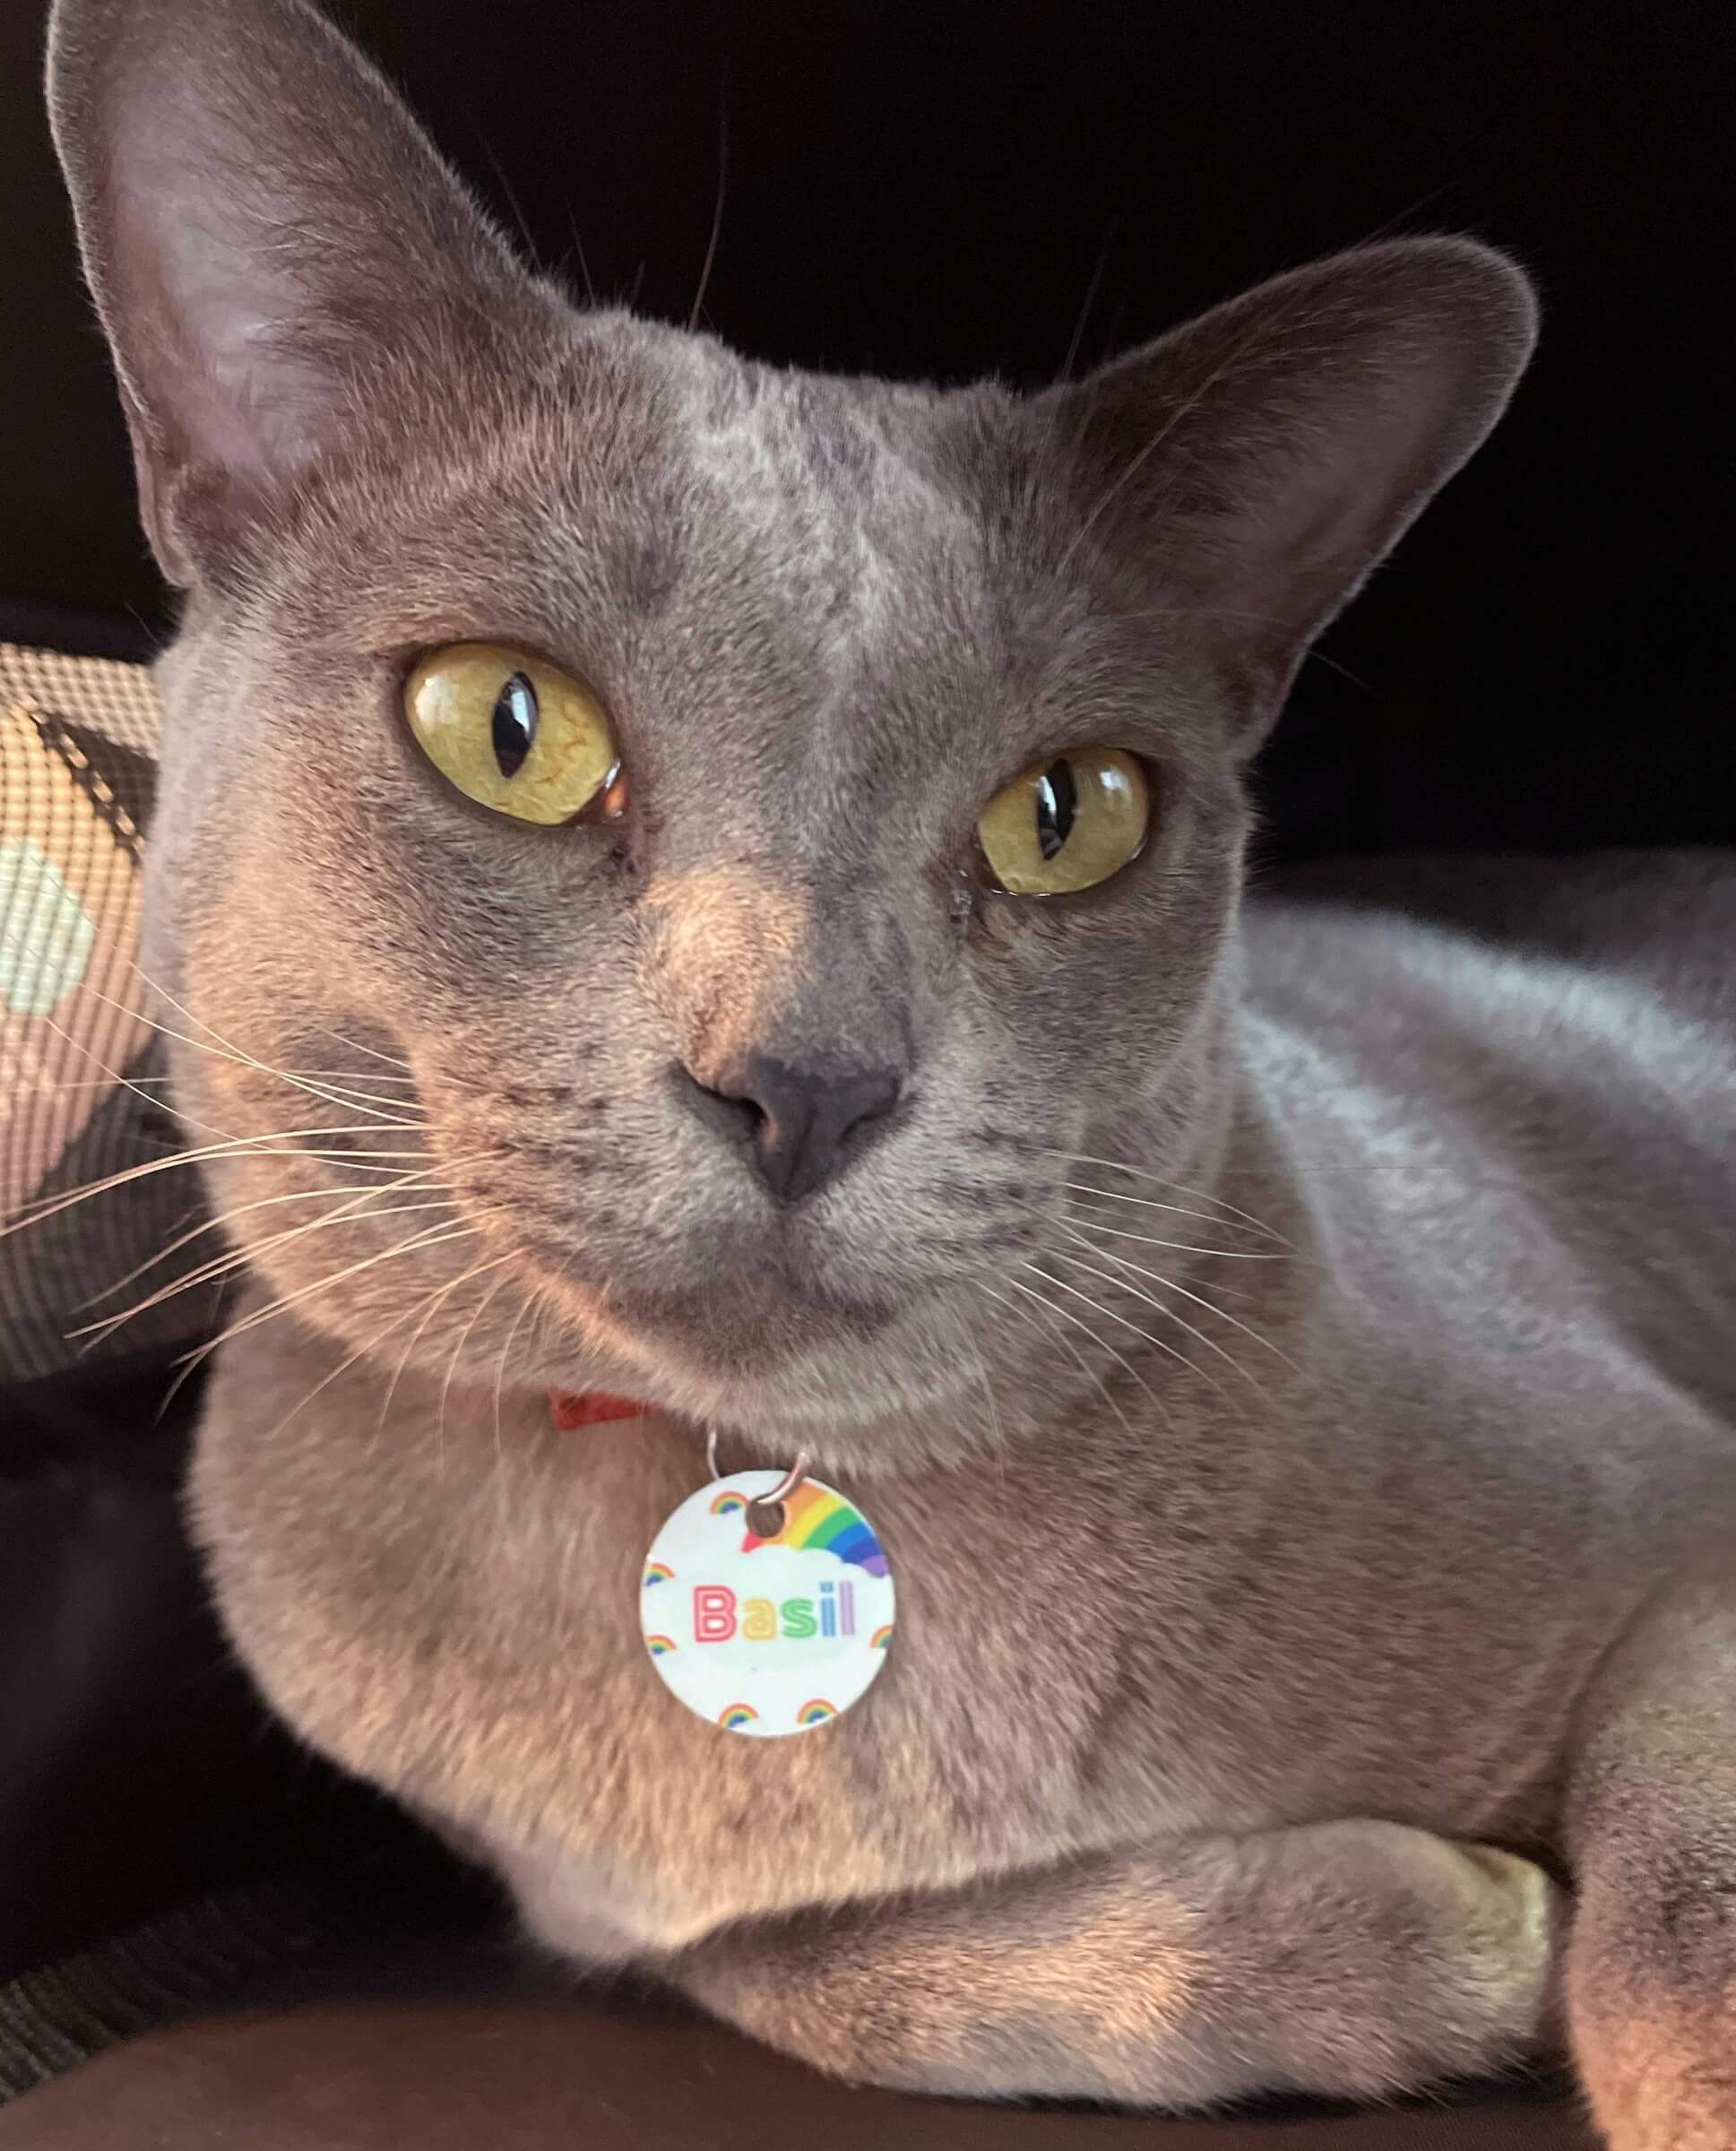 Haluna Happy Names' 'End of the Rainbow' 25mm aluminium name tag lights up the chest of a gorgeous grey cat who looks solemnly straight at the camera